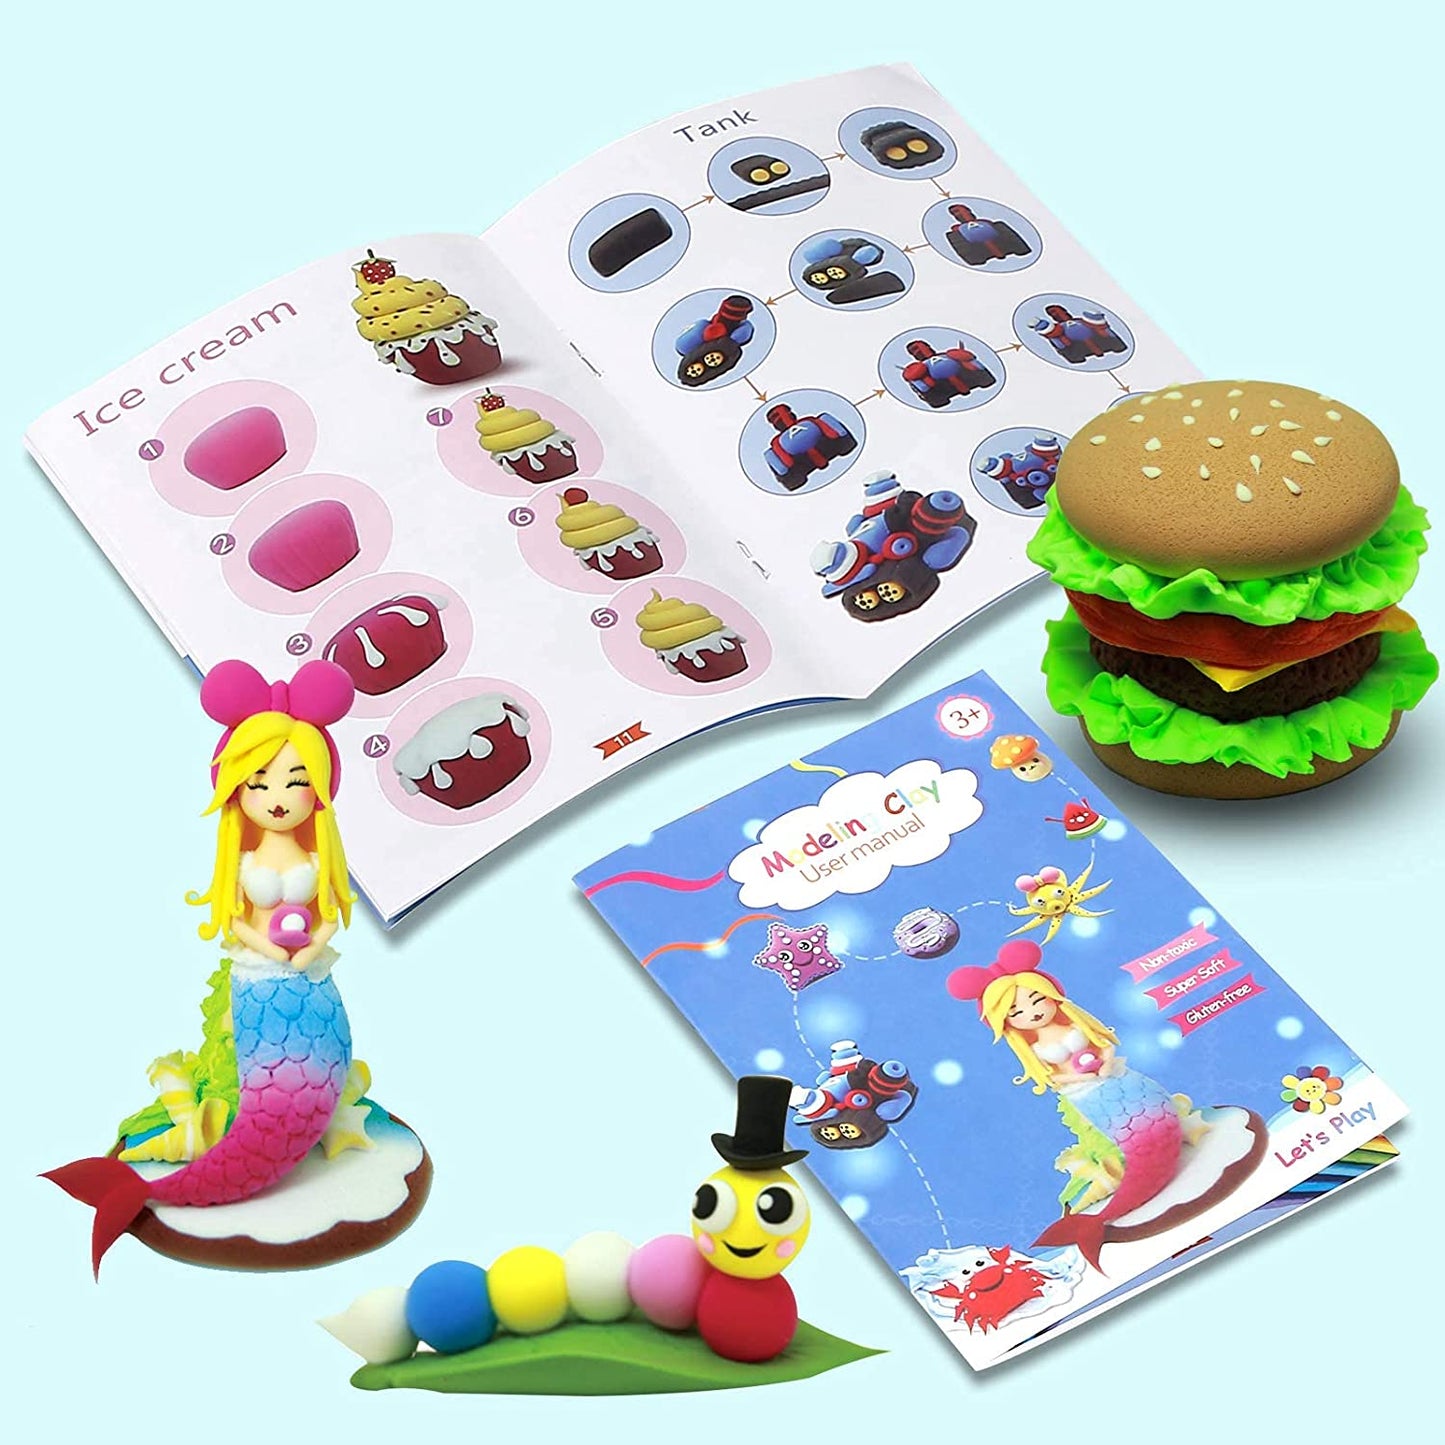 Modeling Clay Kit - 50 Colors Air Dry Ultra Light Clay, Safe & Non-Toxic DIY Magic Clay with Tools, Project Booklet, Accessories, Great Gift for Kids.